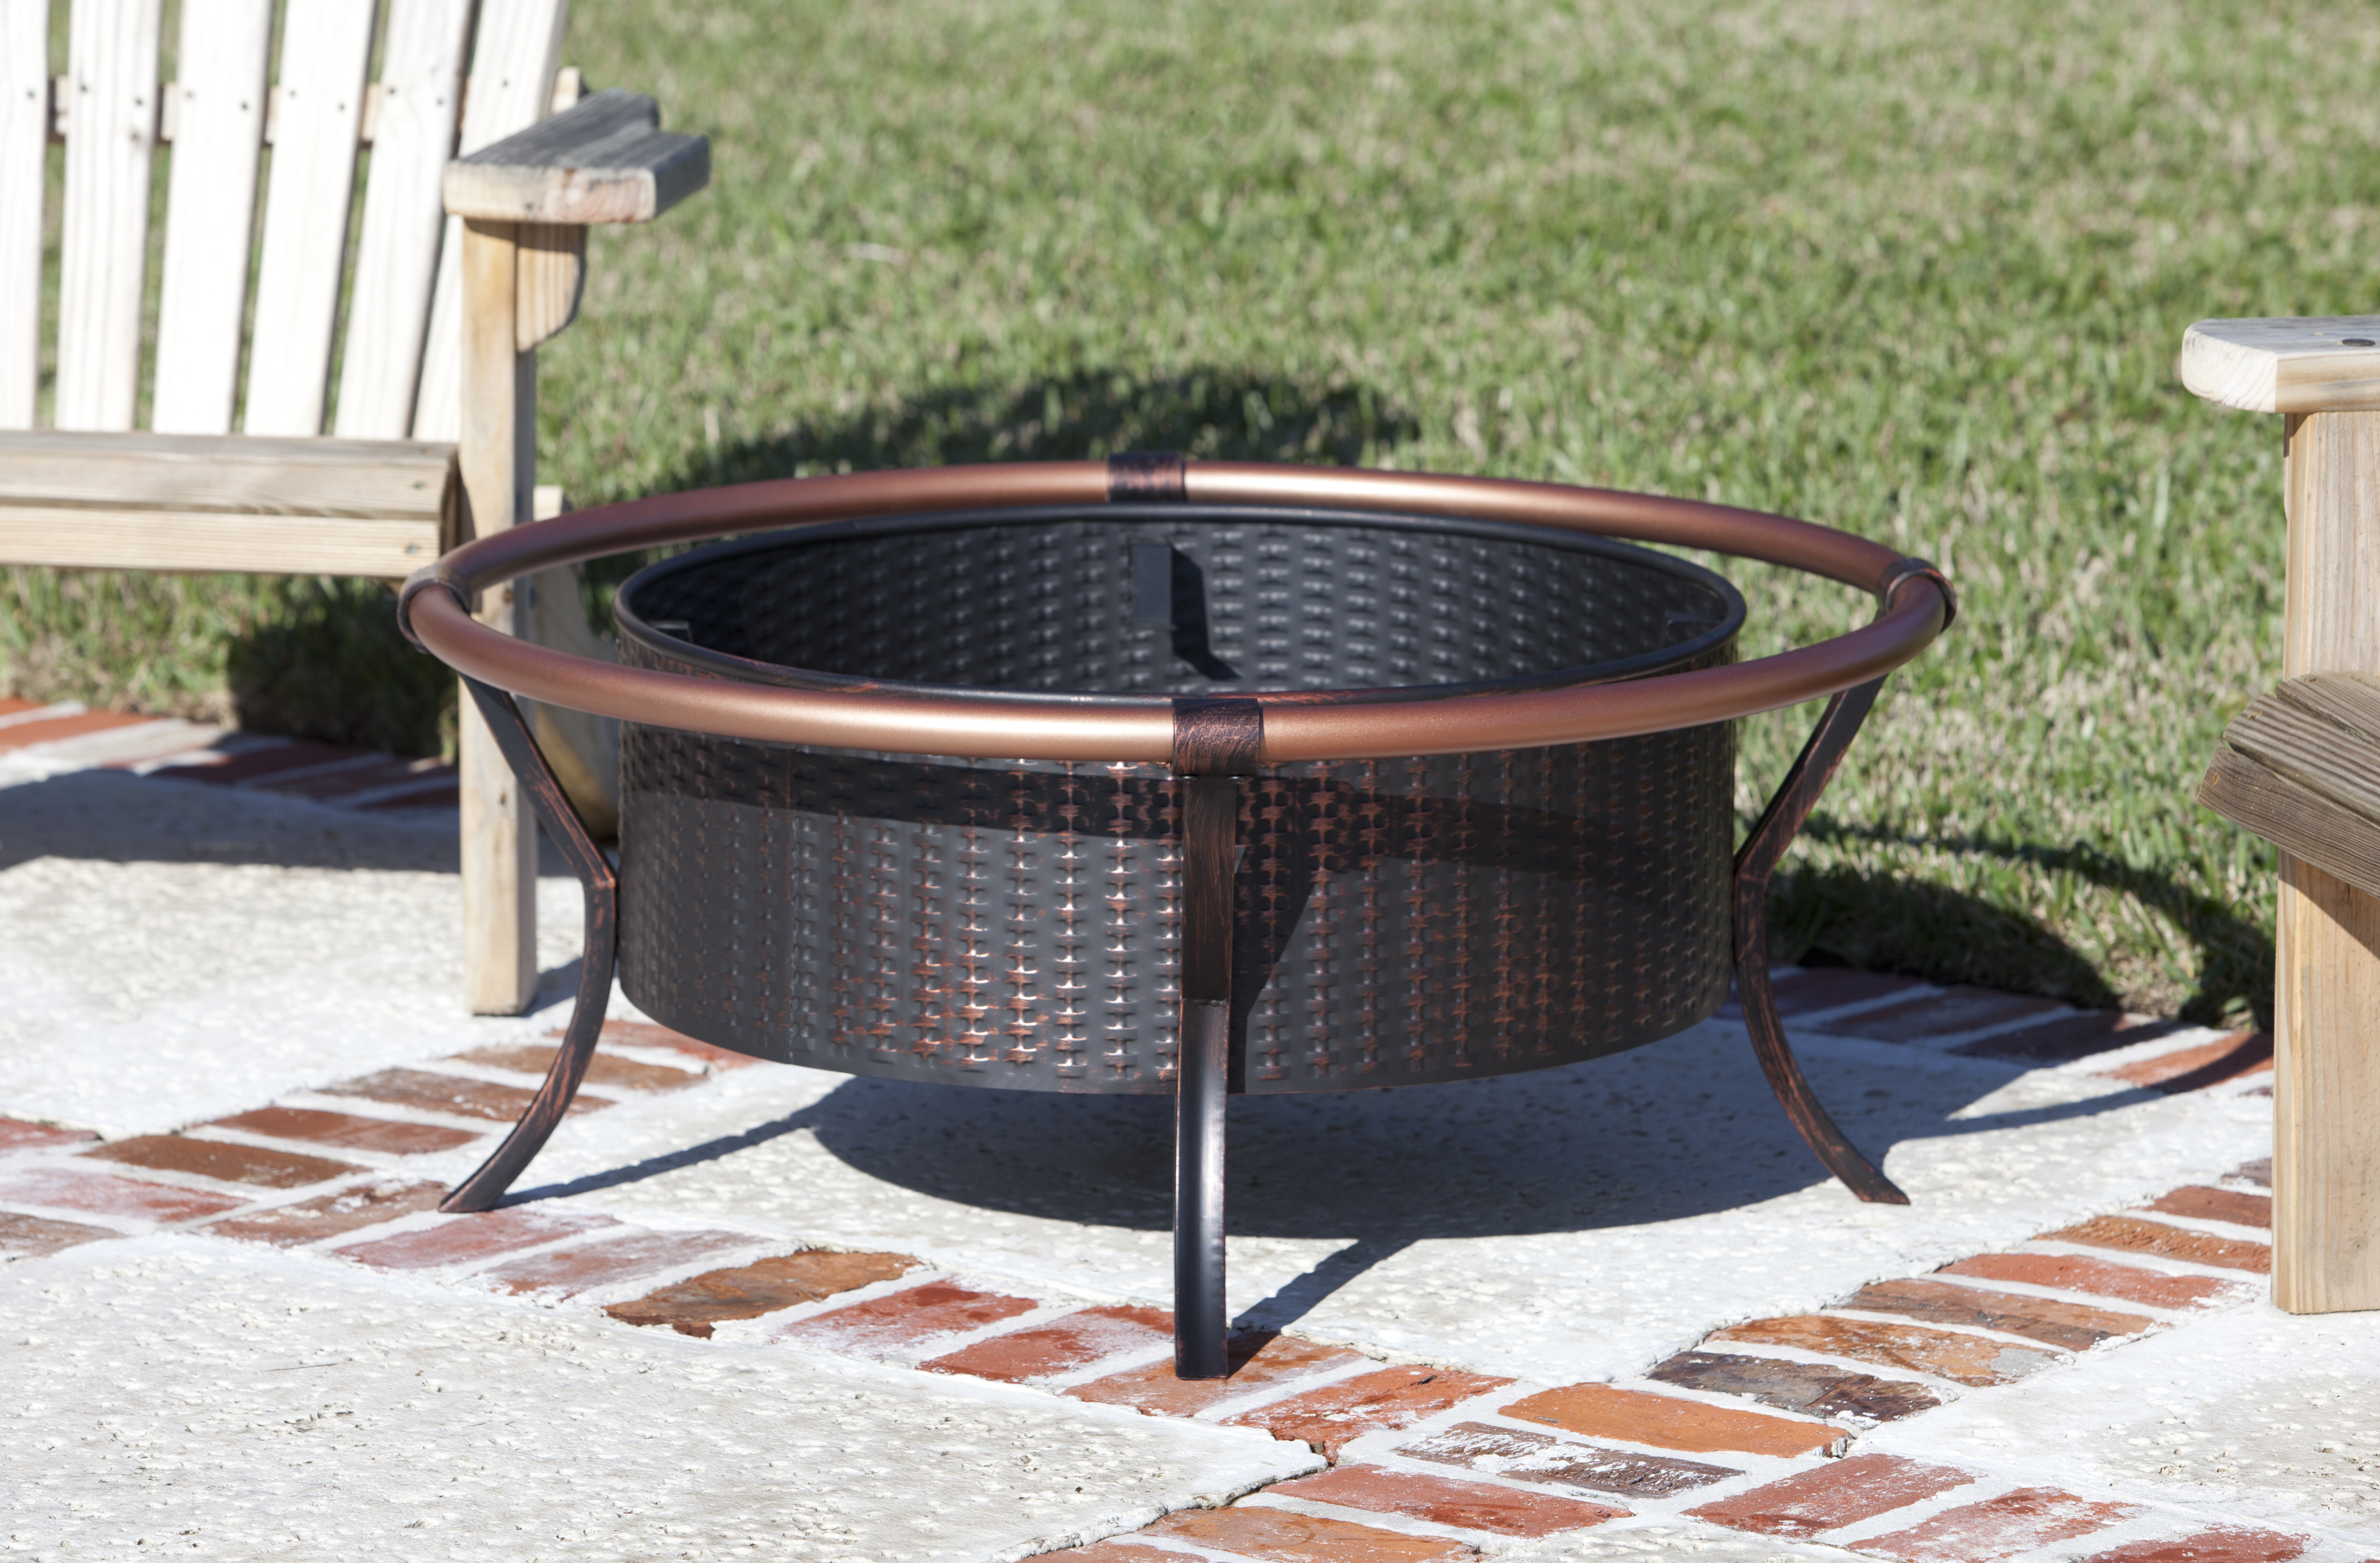 The king fire pit ® brand are made to last forever and will turn your unexc...